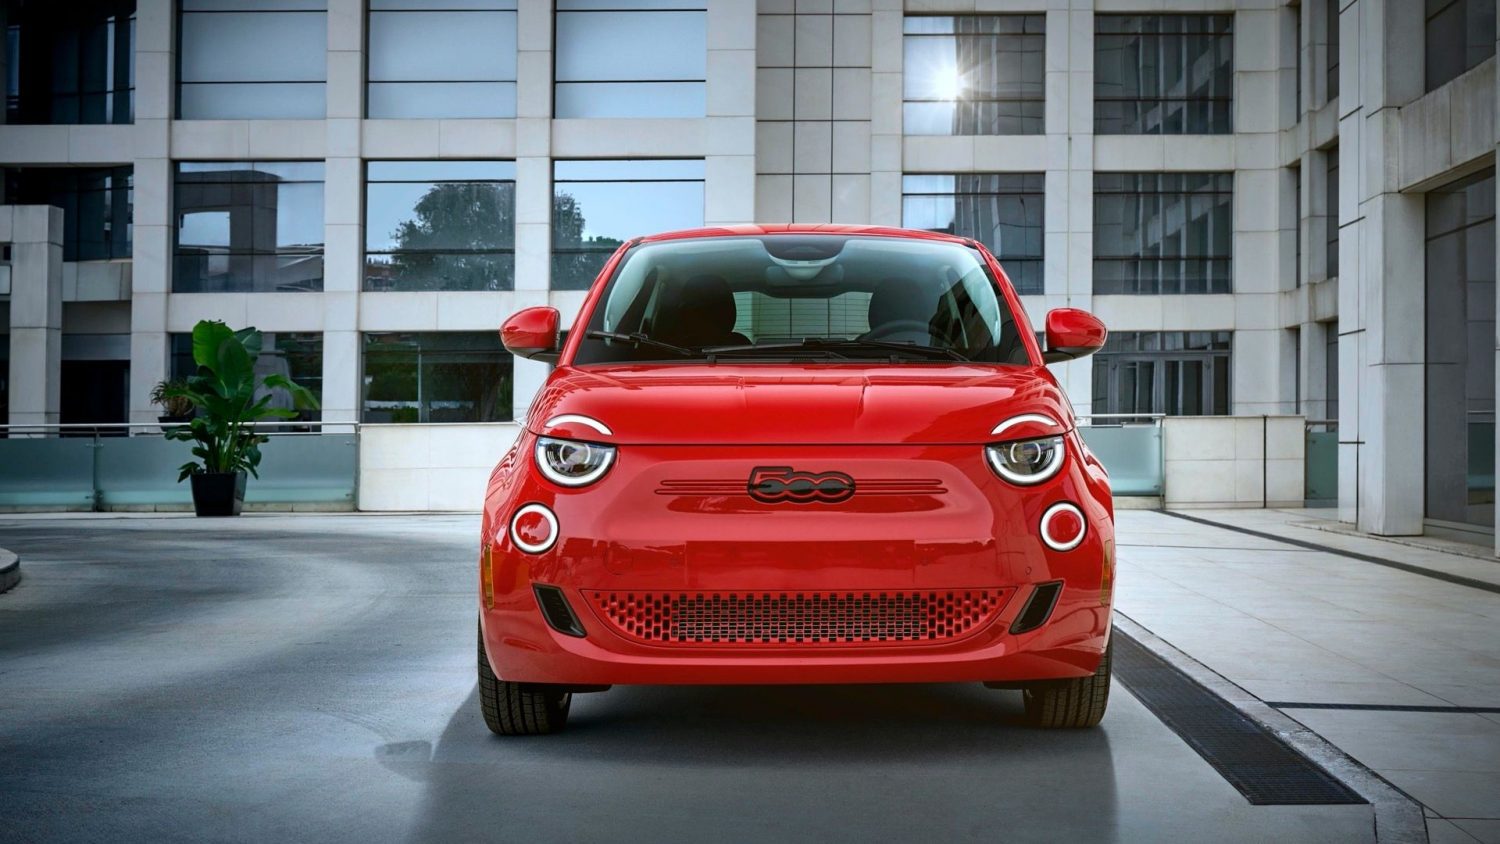 Stellantis will re-introduce the Fiat 500e, a small but unique electric vehicle, for the U.S. car market in 2023.